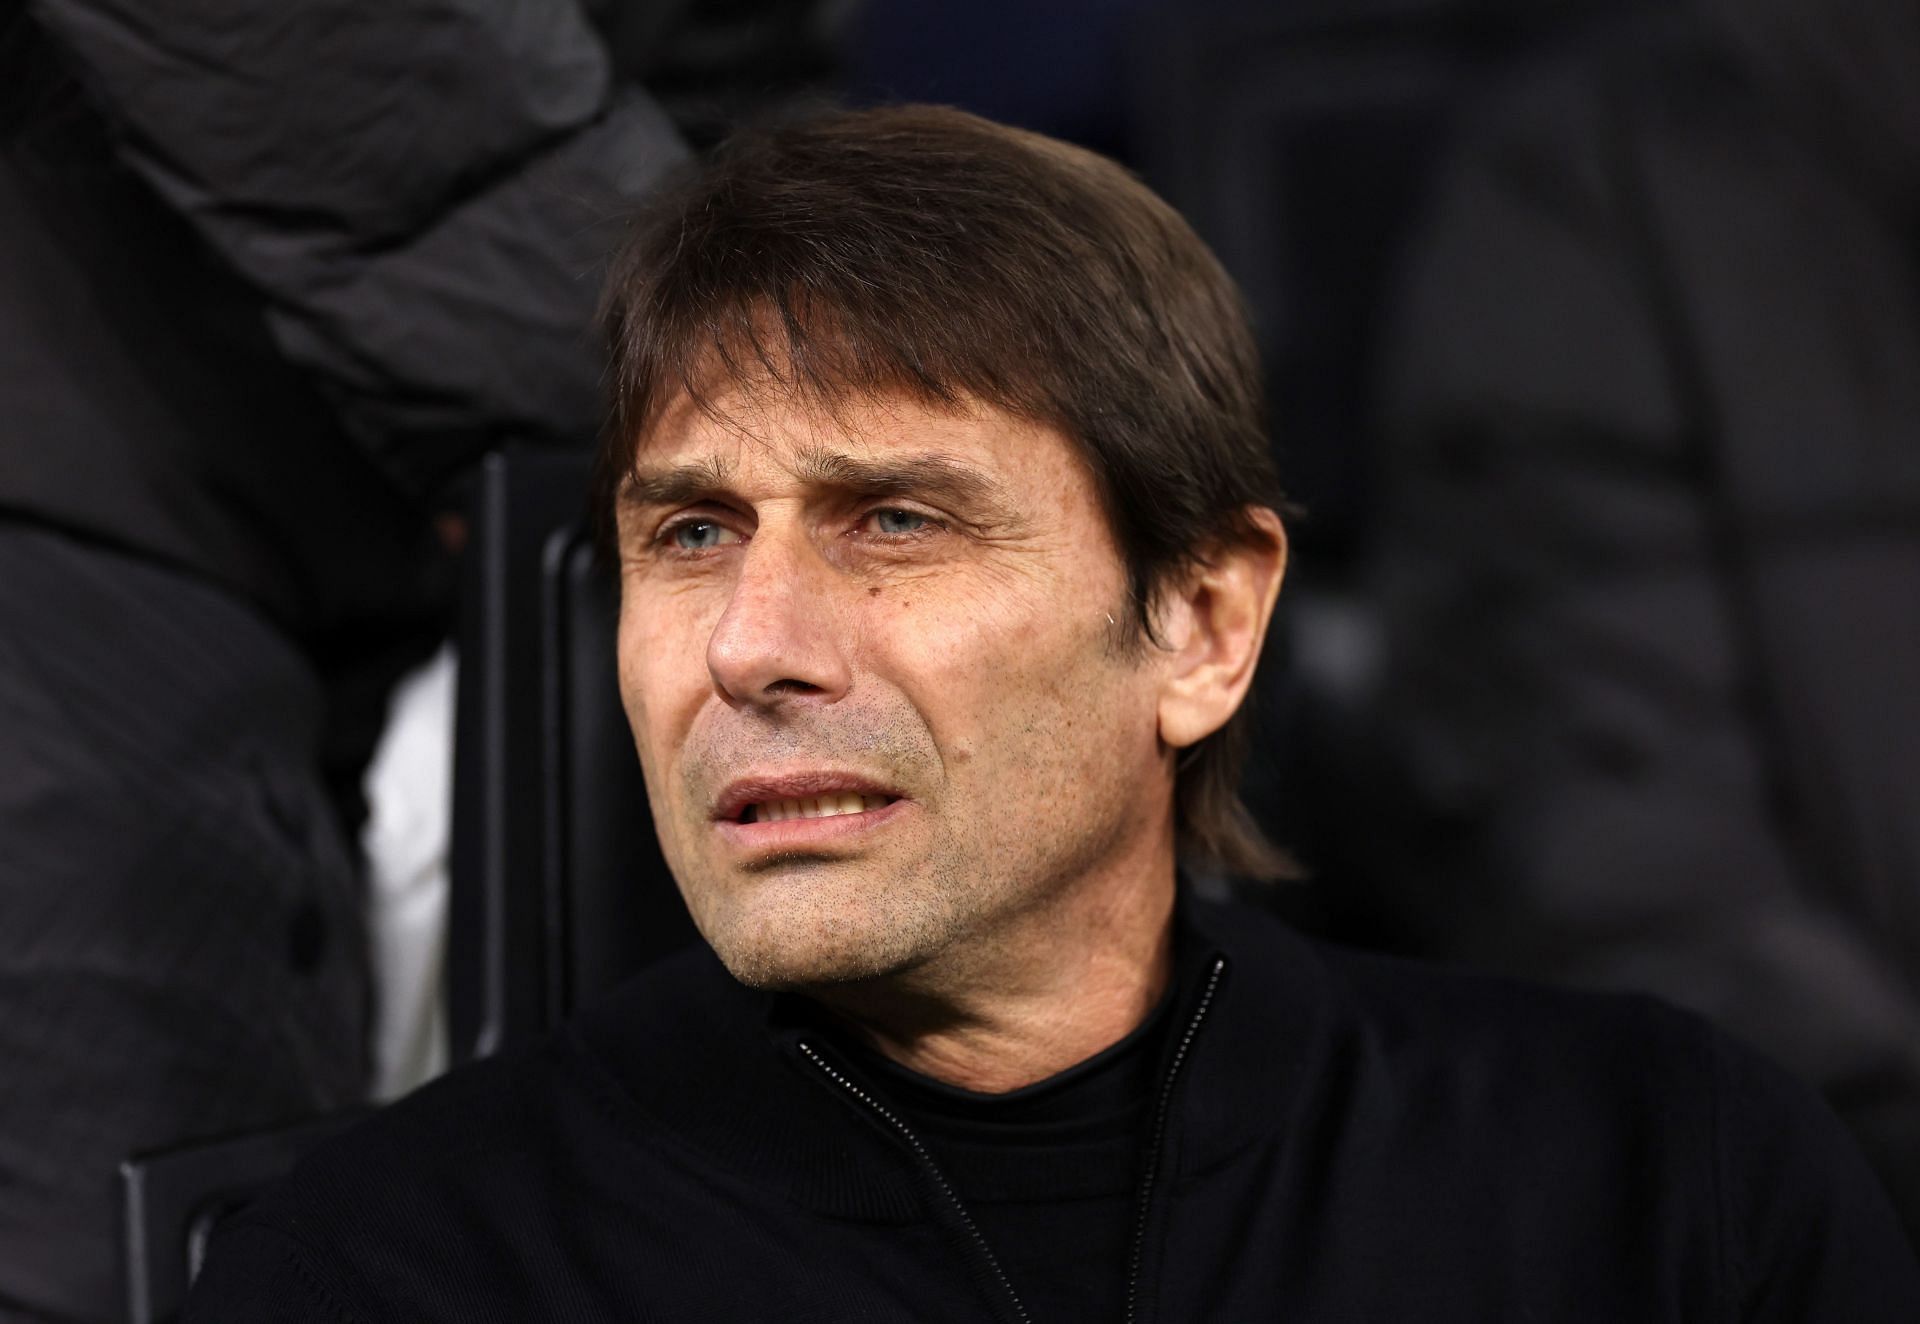 Antonio Conte has offered his support to Graham Potter during these difficult times.